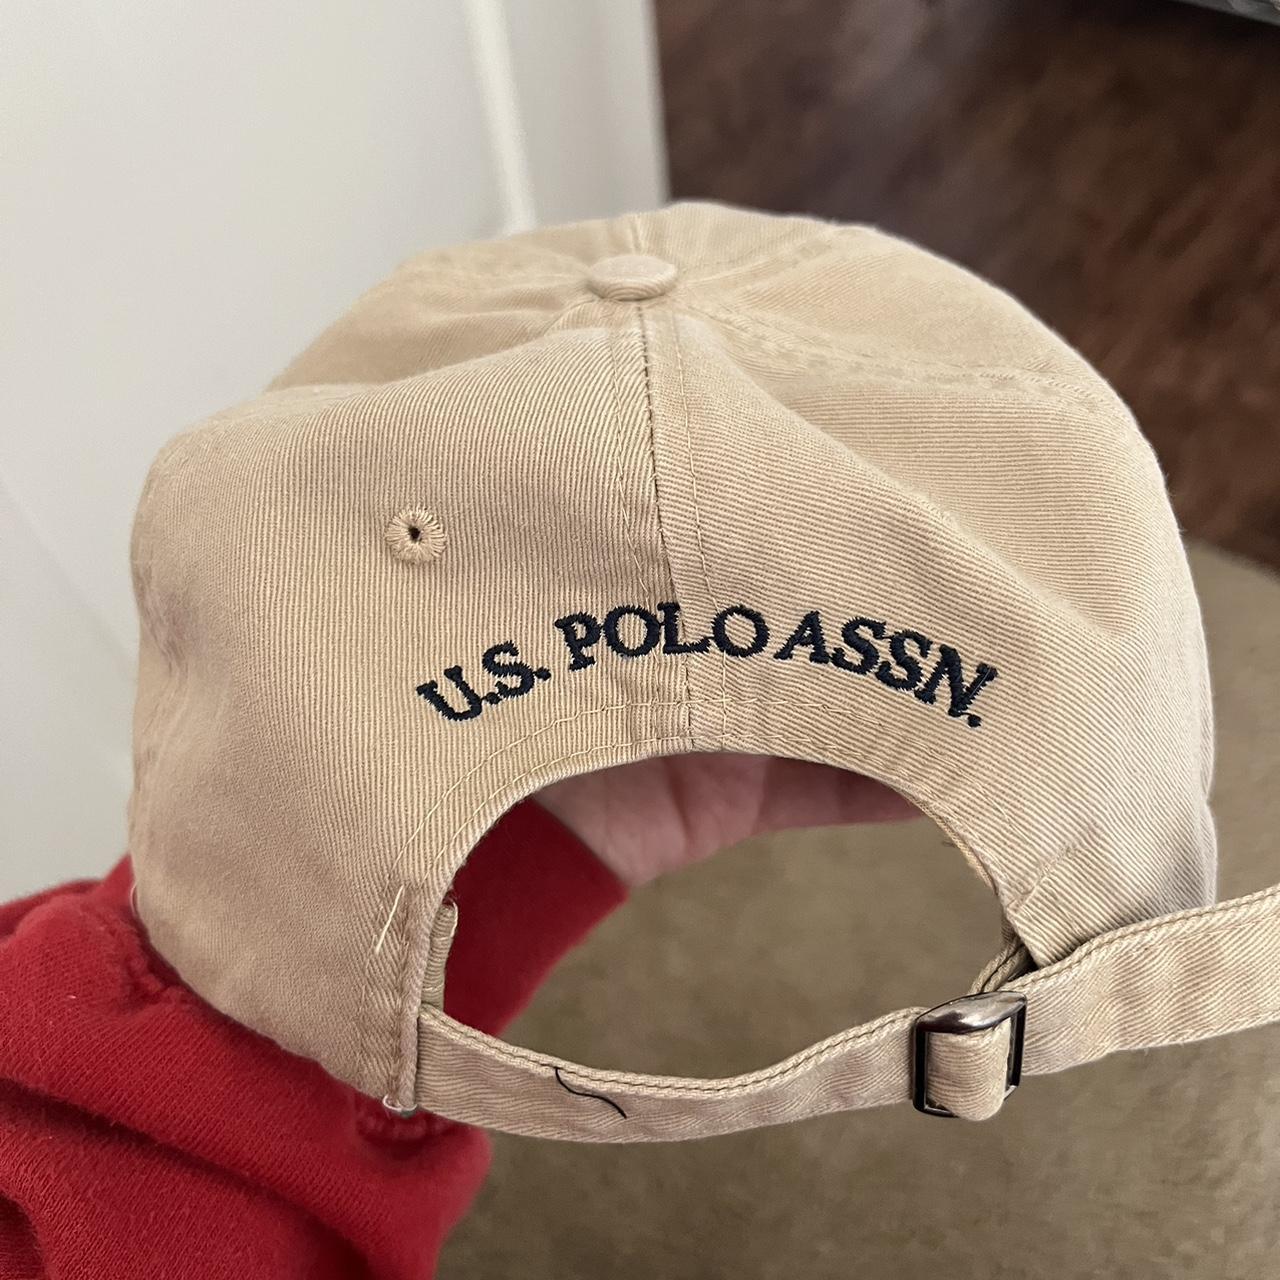 U.S. Polo Assn. Women's Cream and Brown Hat (2)